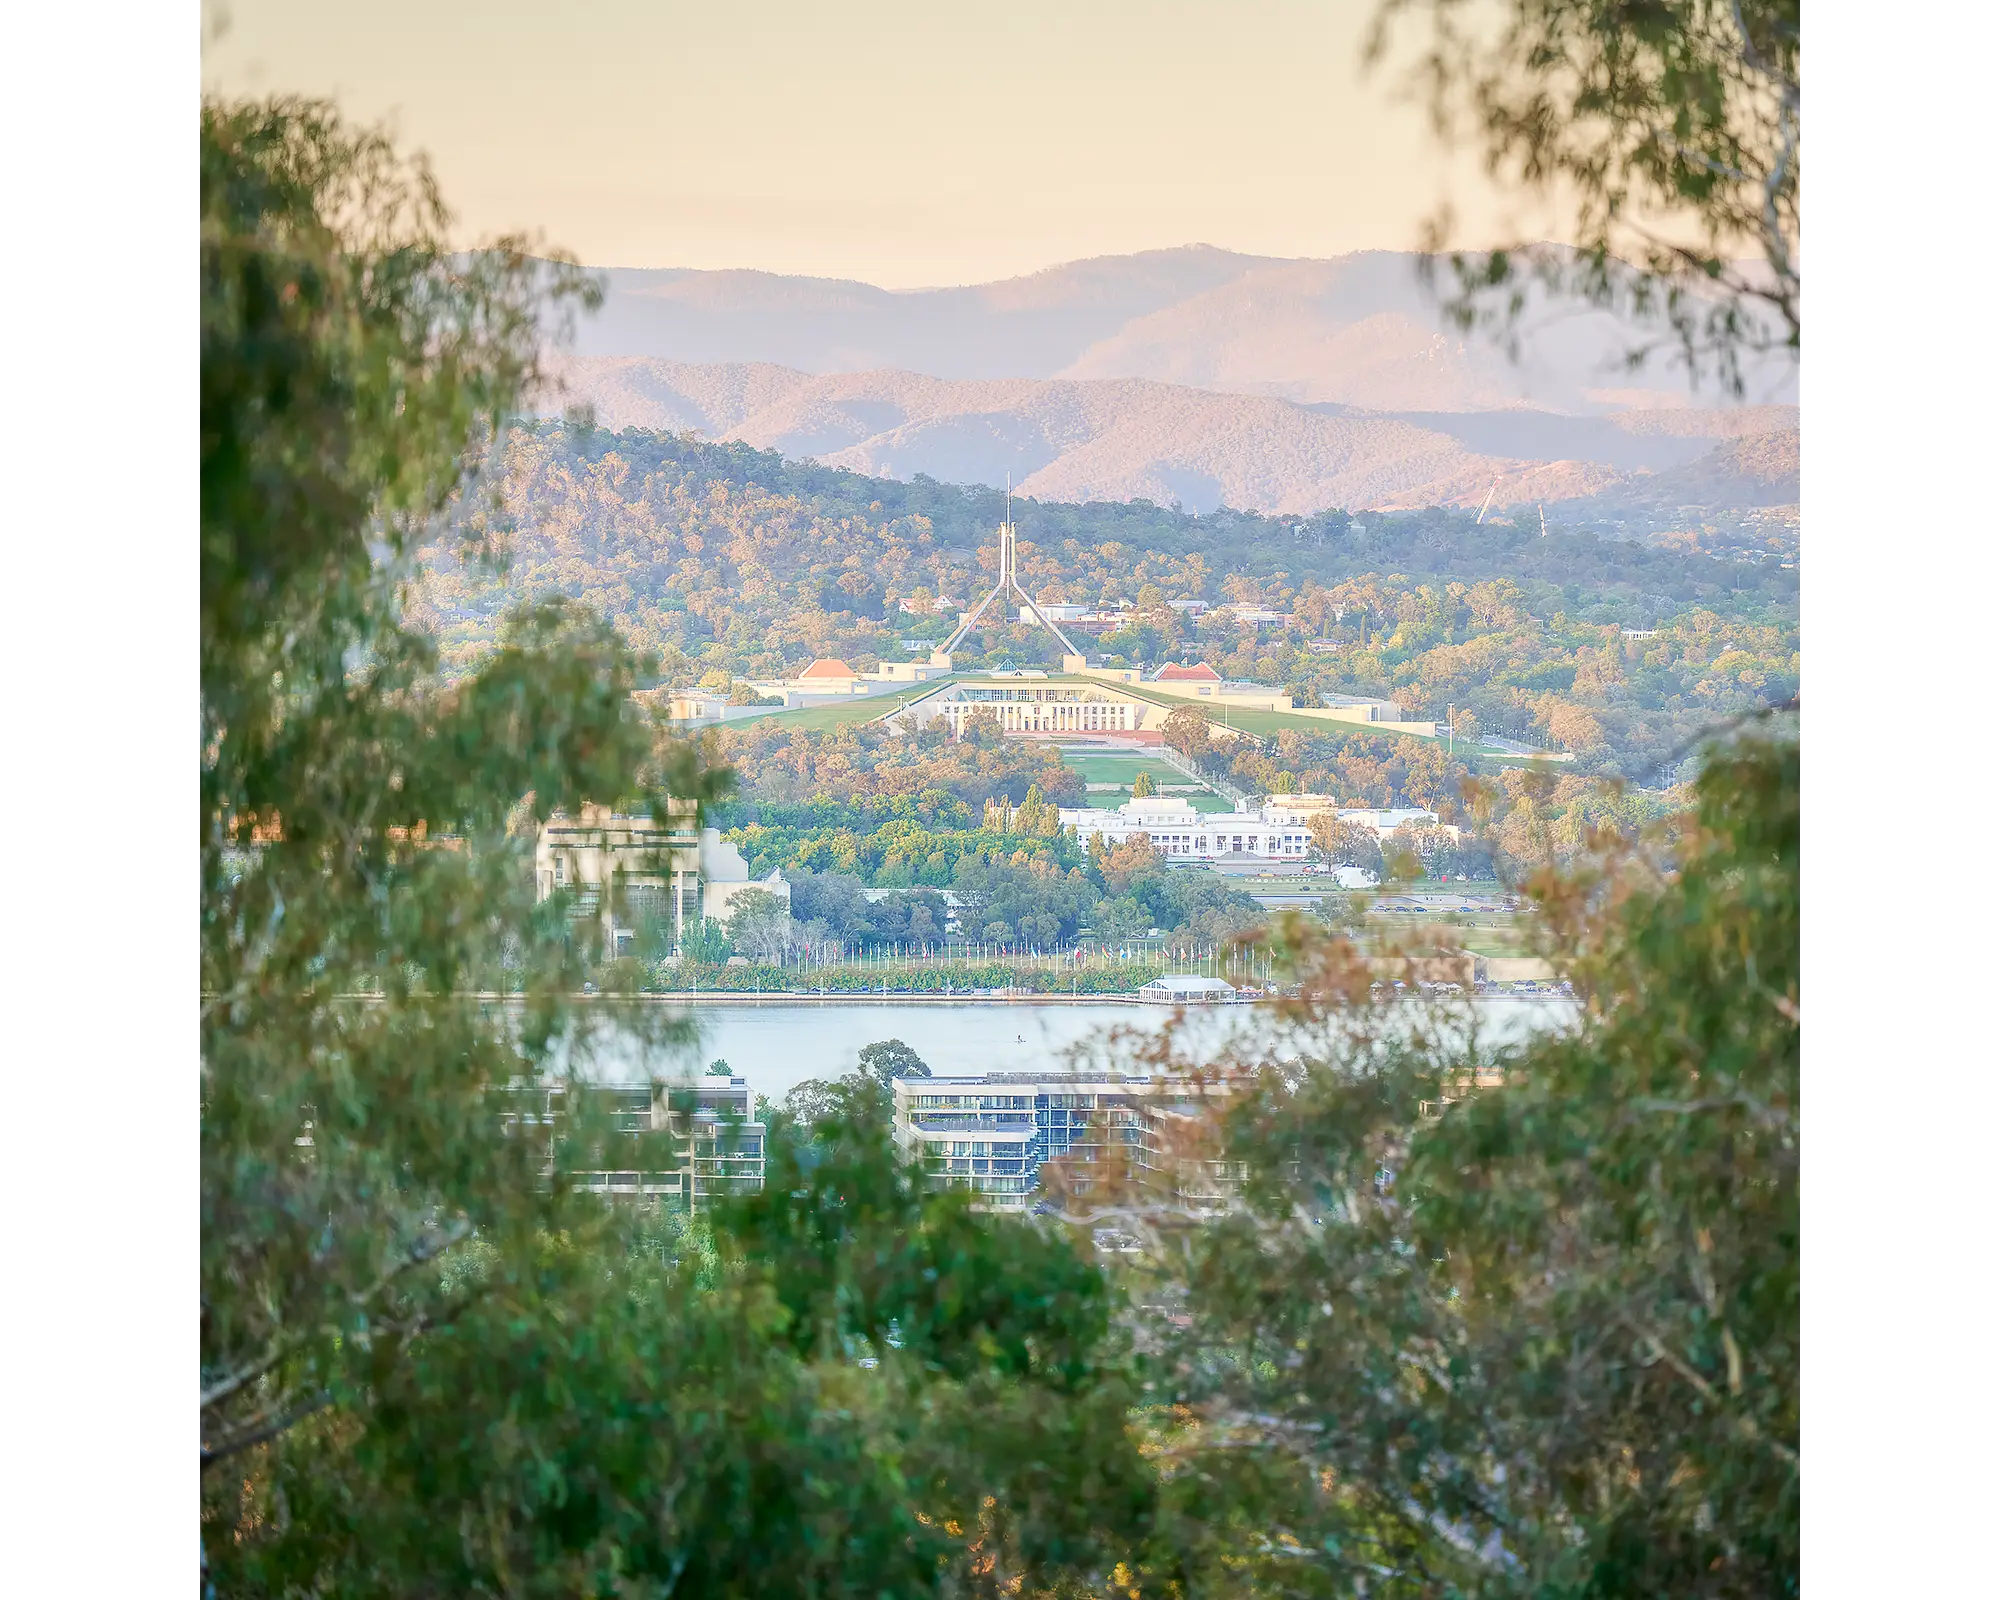 Capital View. Looking through gum trees to Parliament House, Canberra.